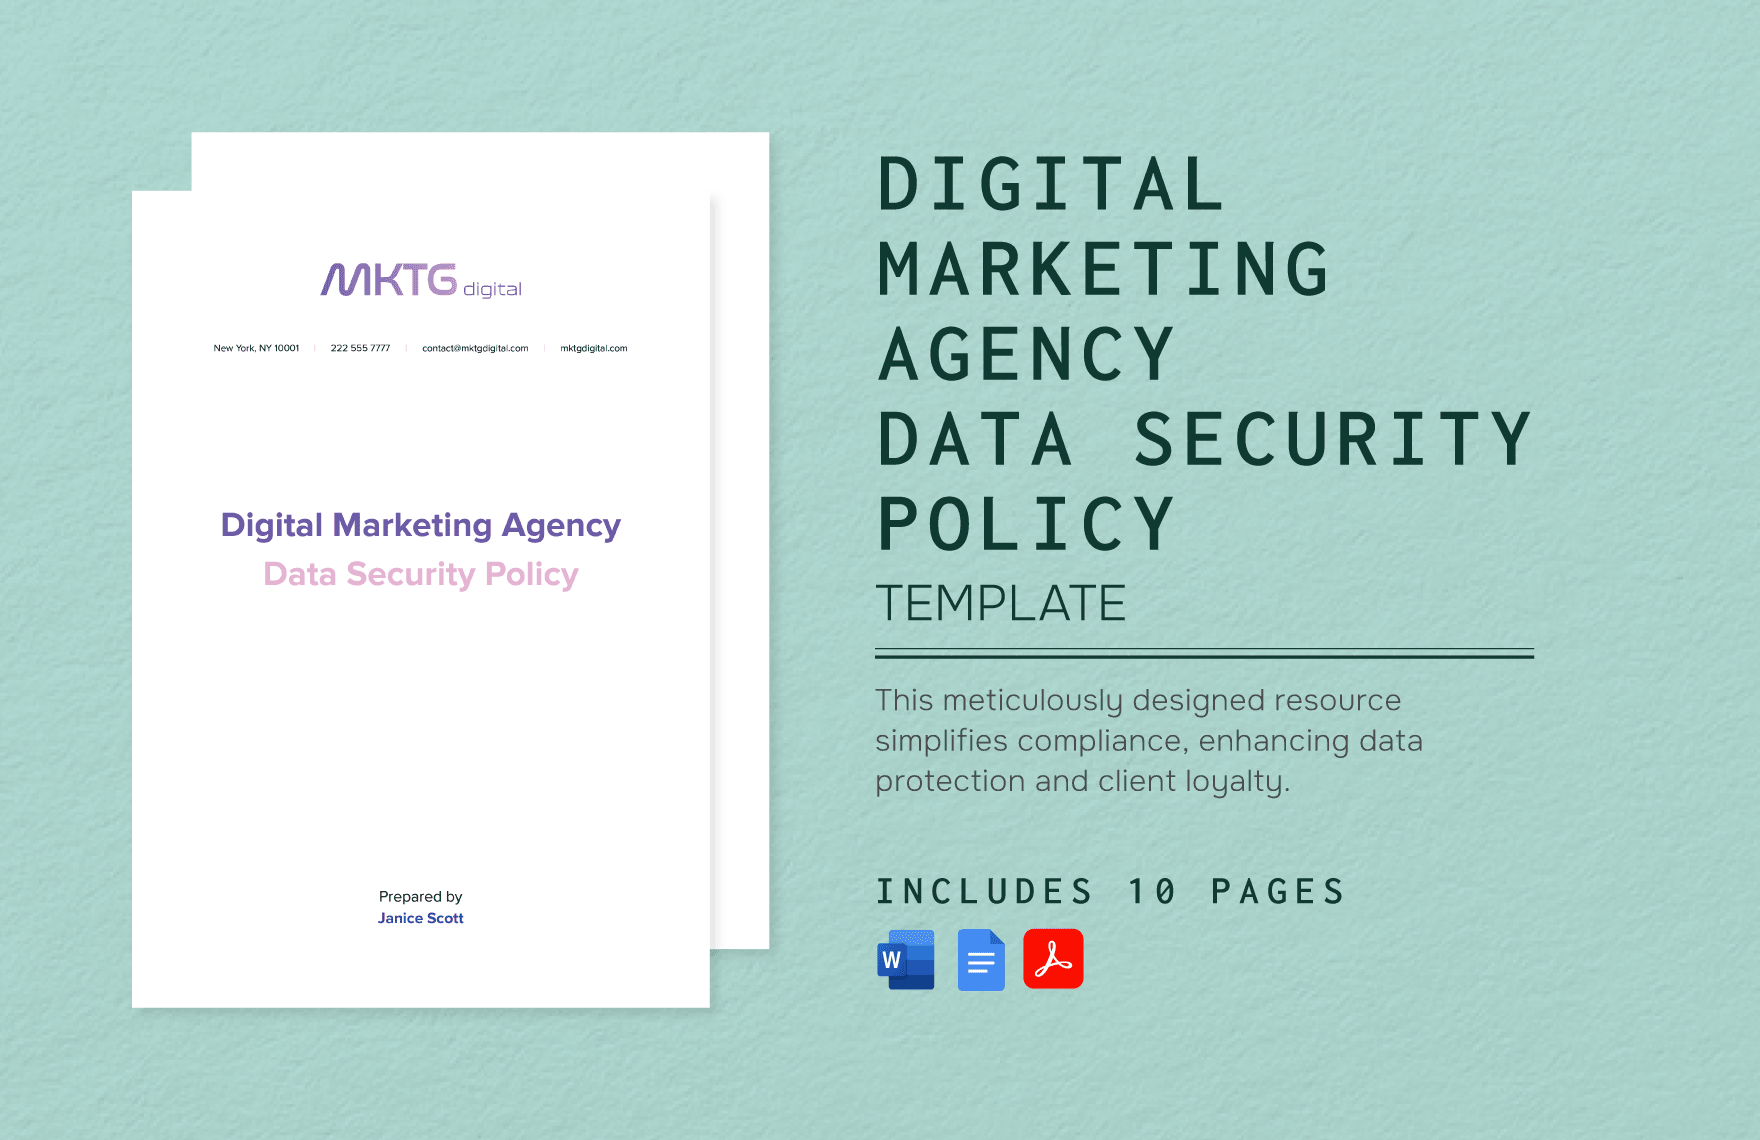 Free Digital Marketing Agency Data Security Policy Template in Word, Google Docs, PDF